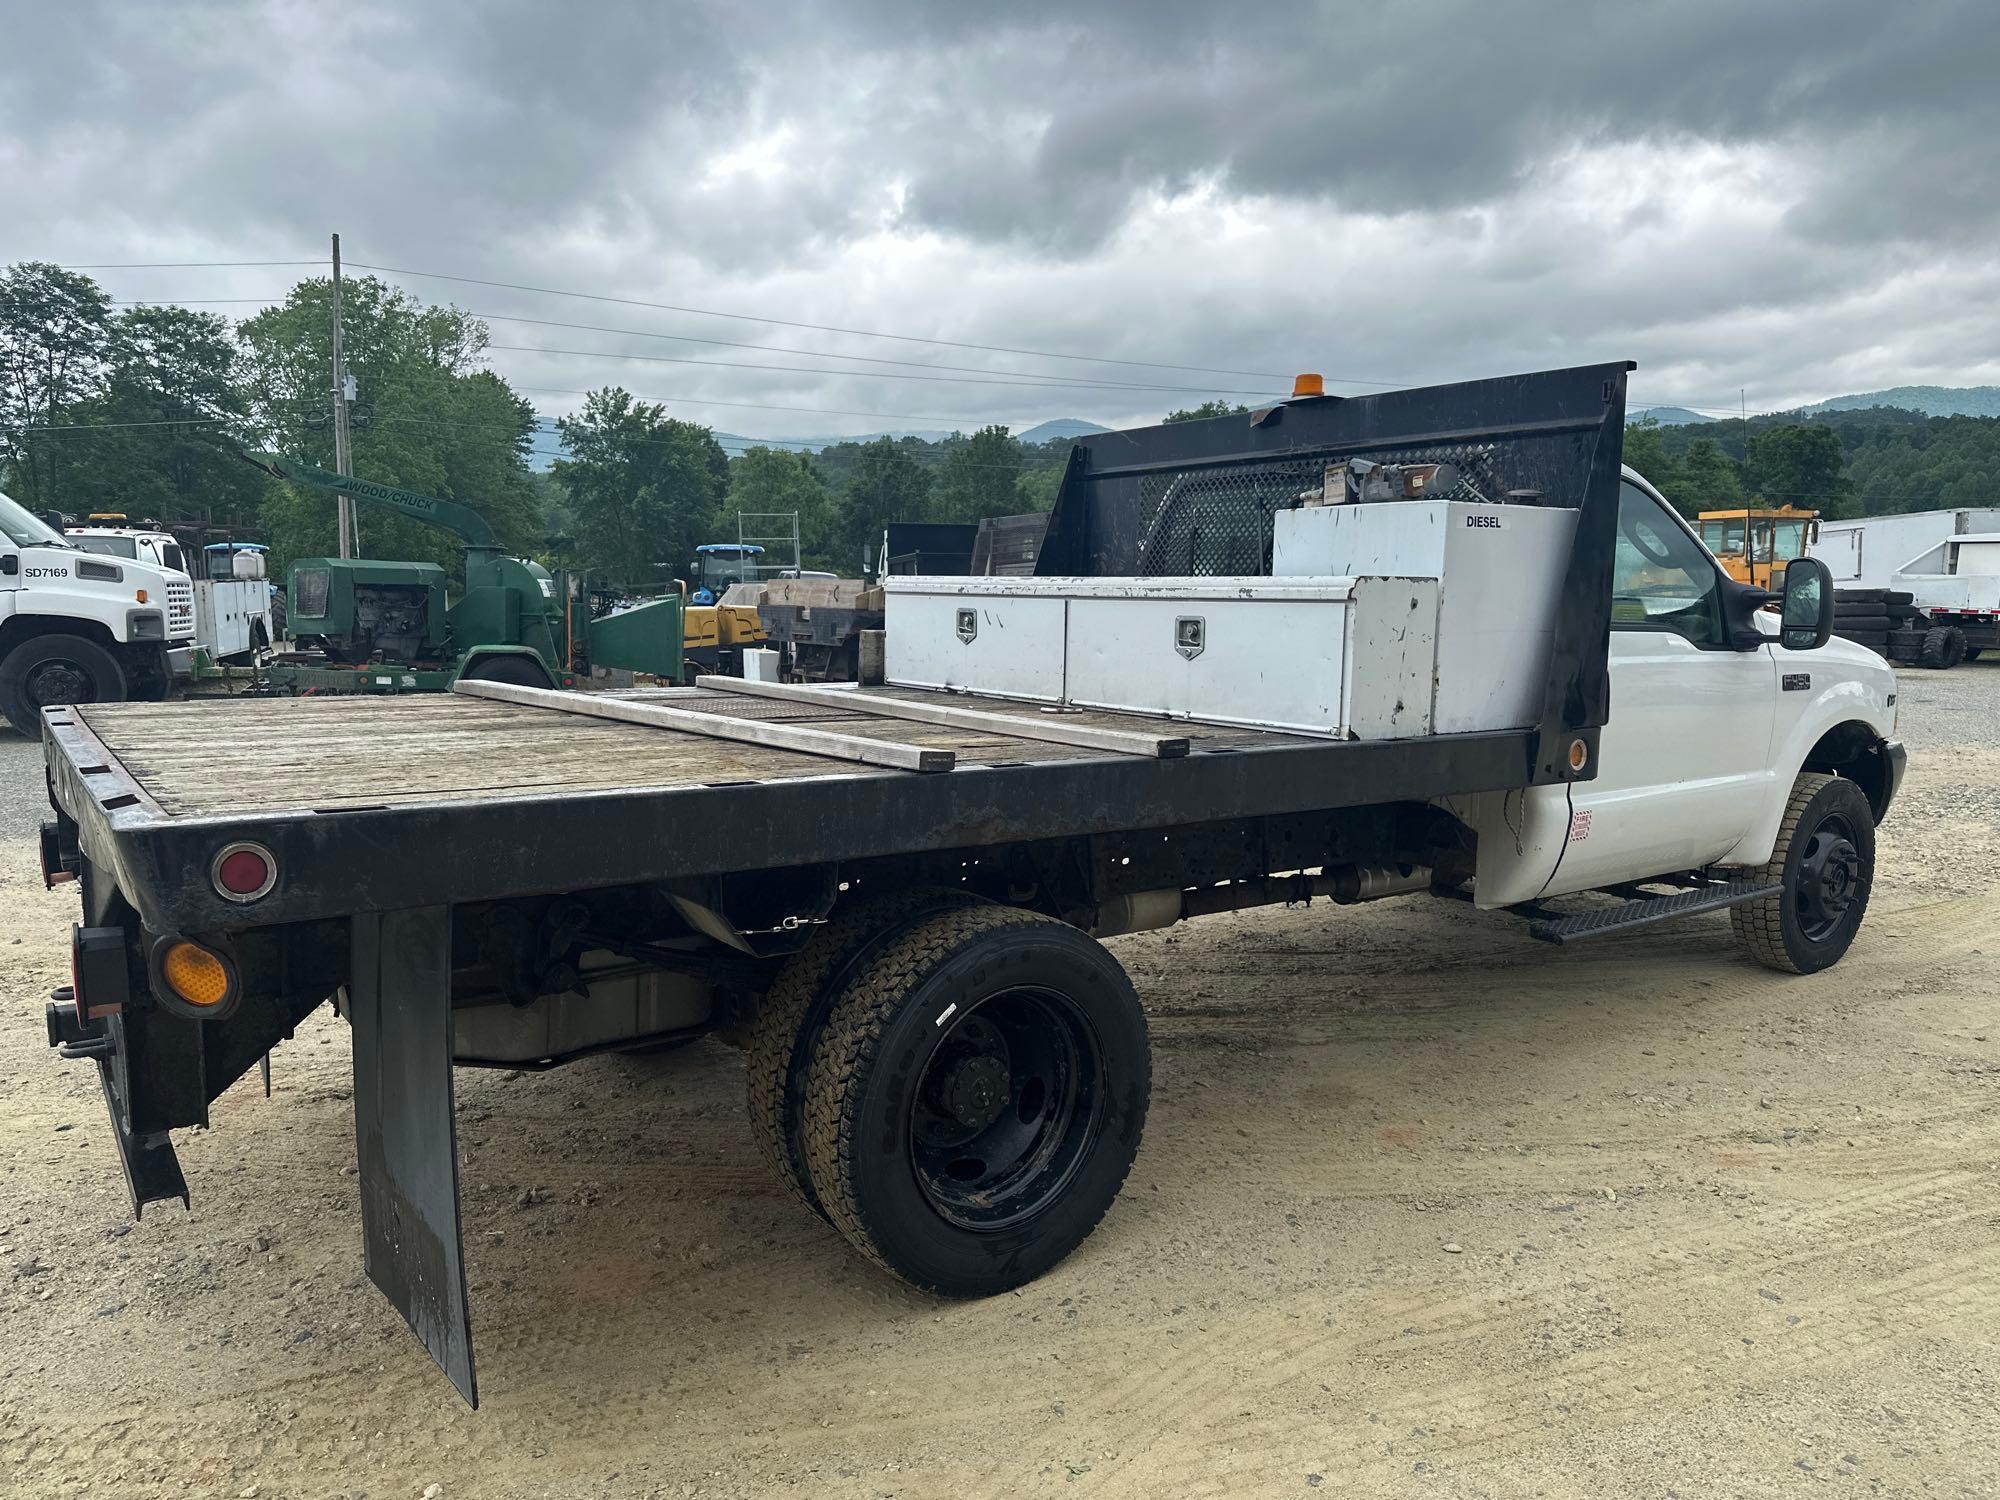 2003 Ford F-450 4X4 Flatbed Truck, VIN # 1FDXF47S93ED35448